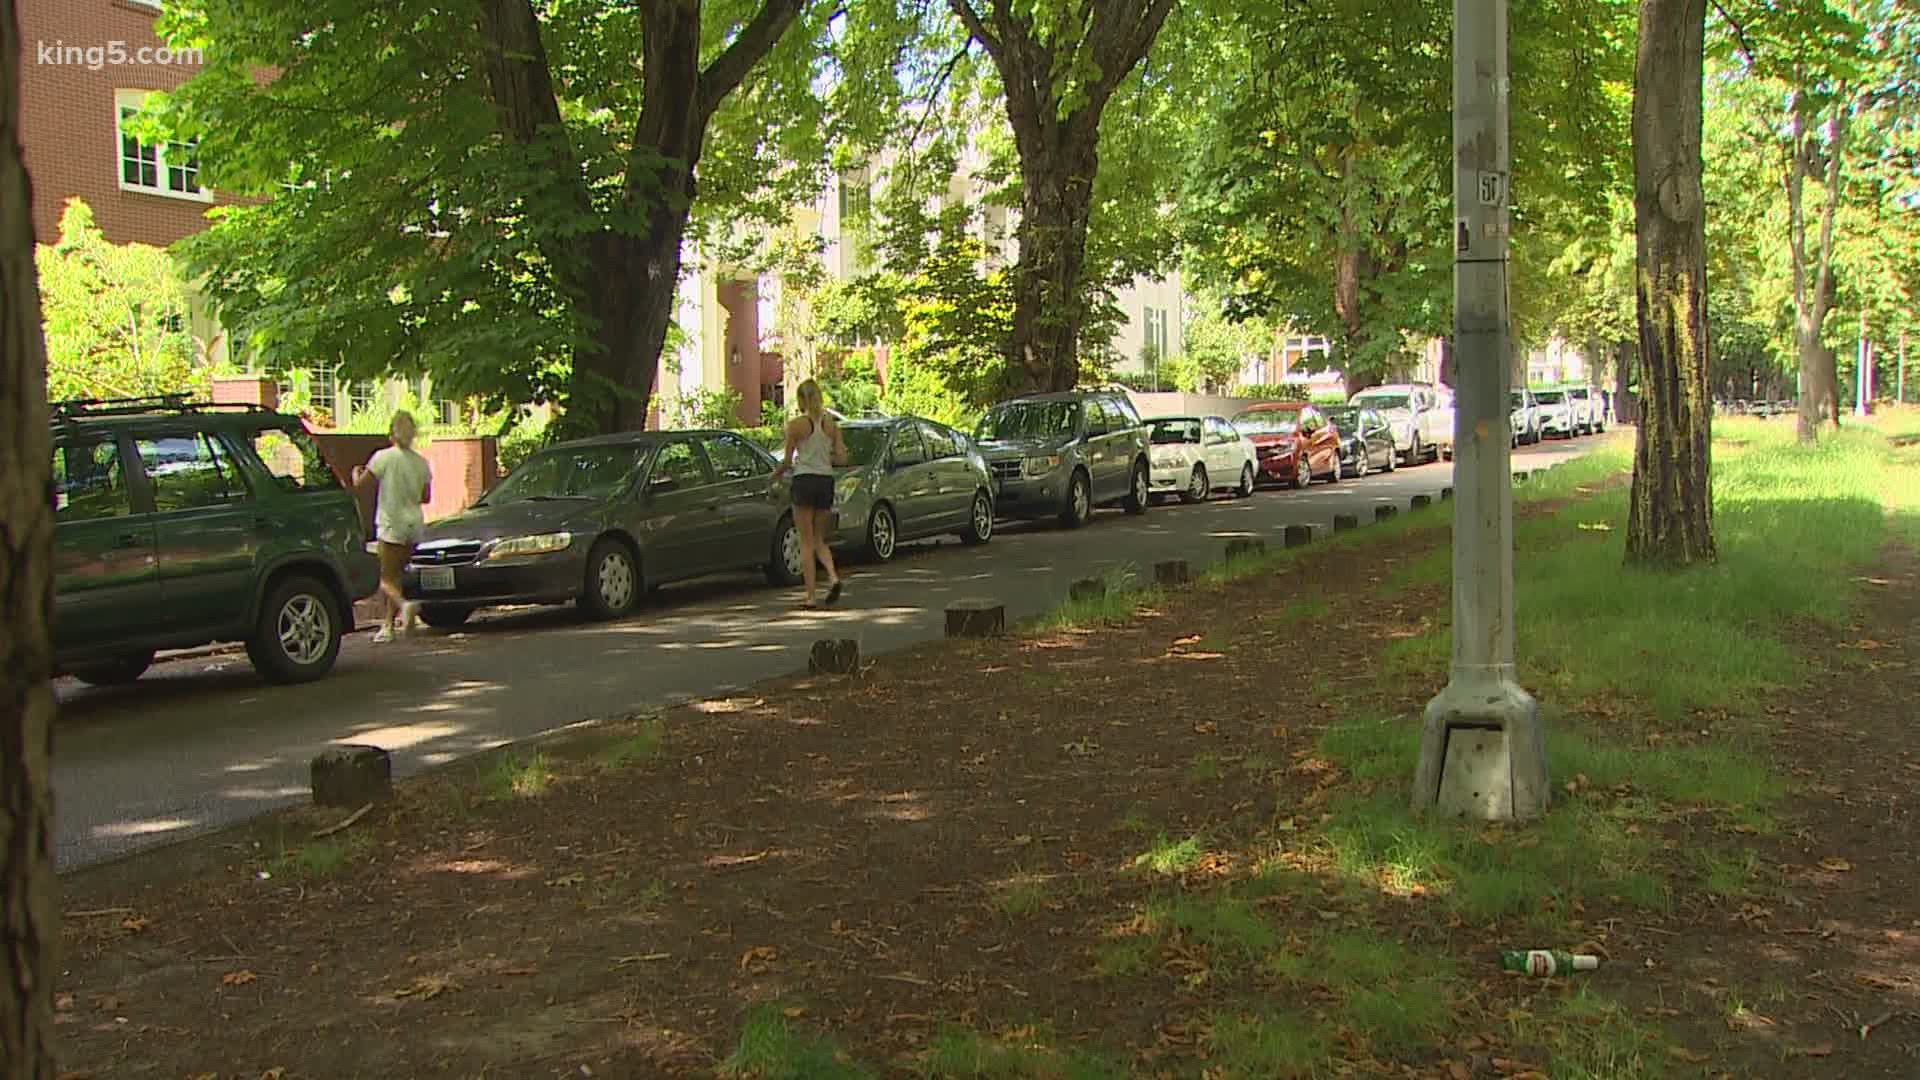 A COVID-19 outbreak on the University of Washington's Greek Row came two weeks after about 1,100 Greek students returned for summer.